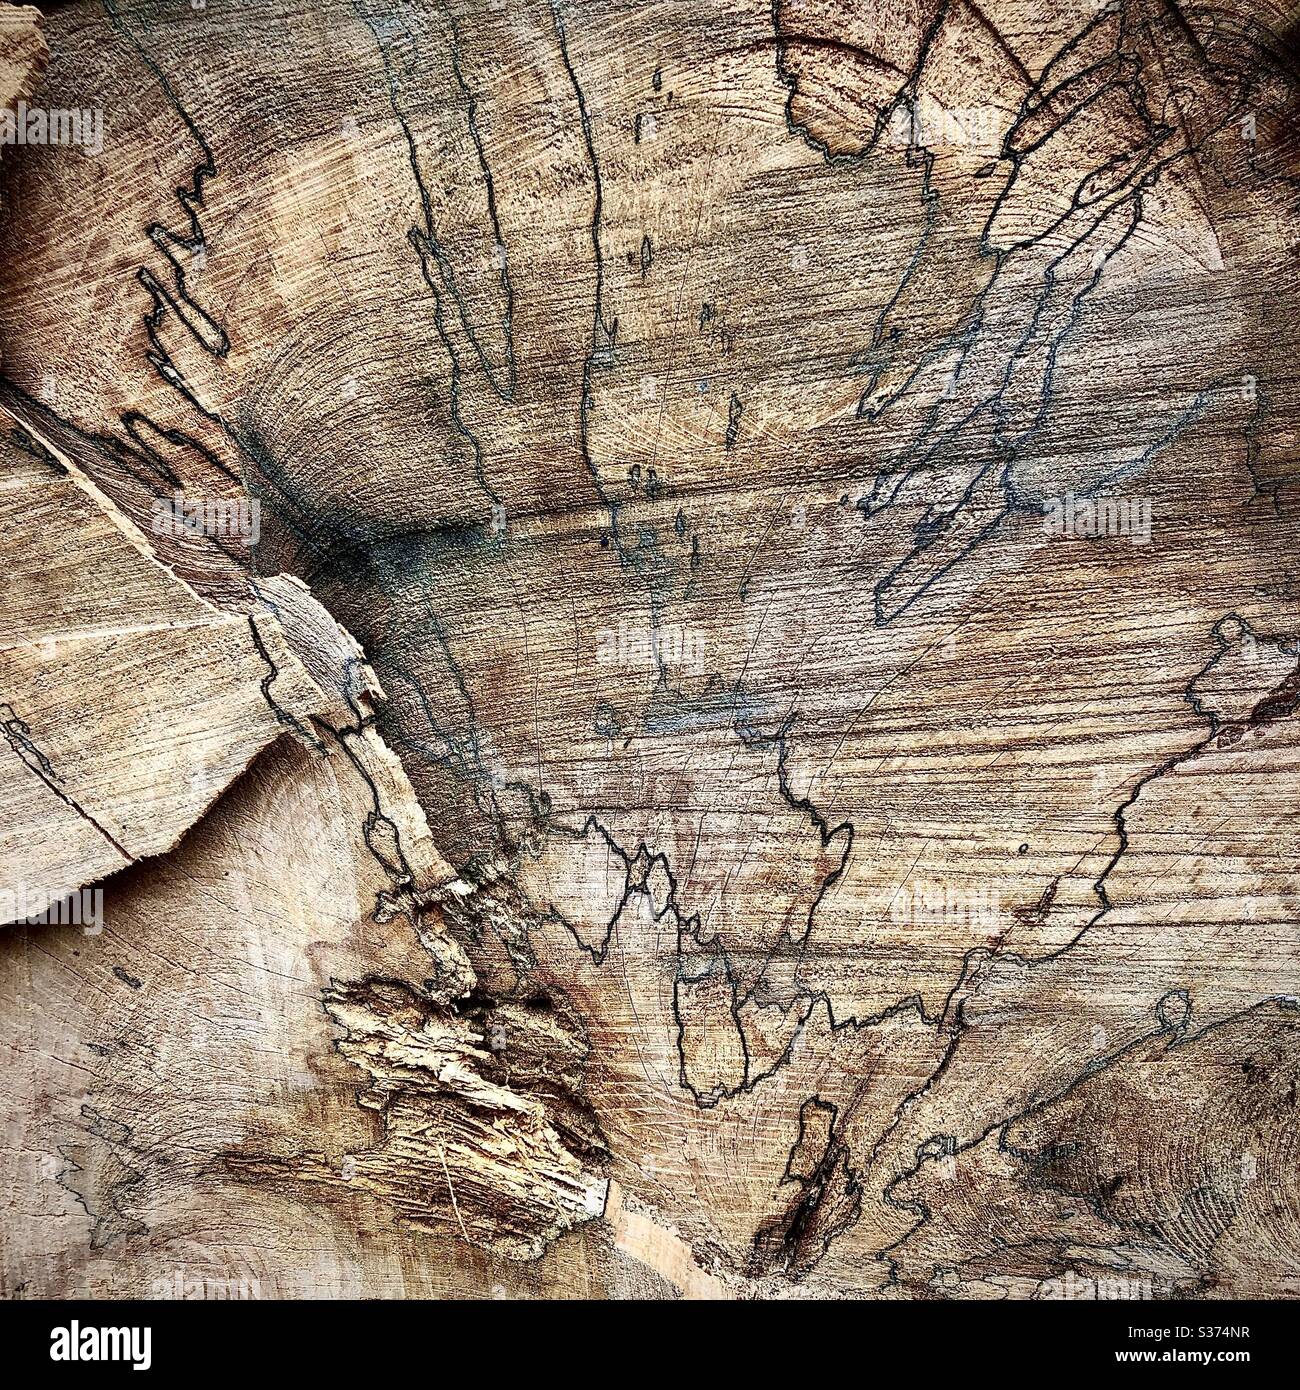 Texture and pattern in cross-section of sawn tree trunk. Stock Photo